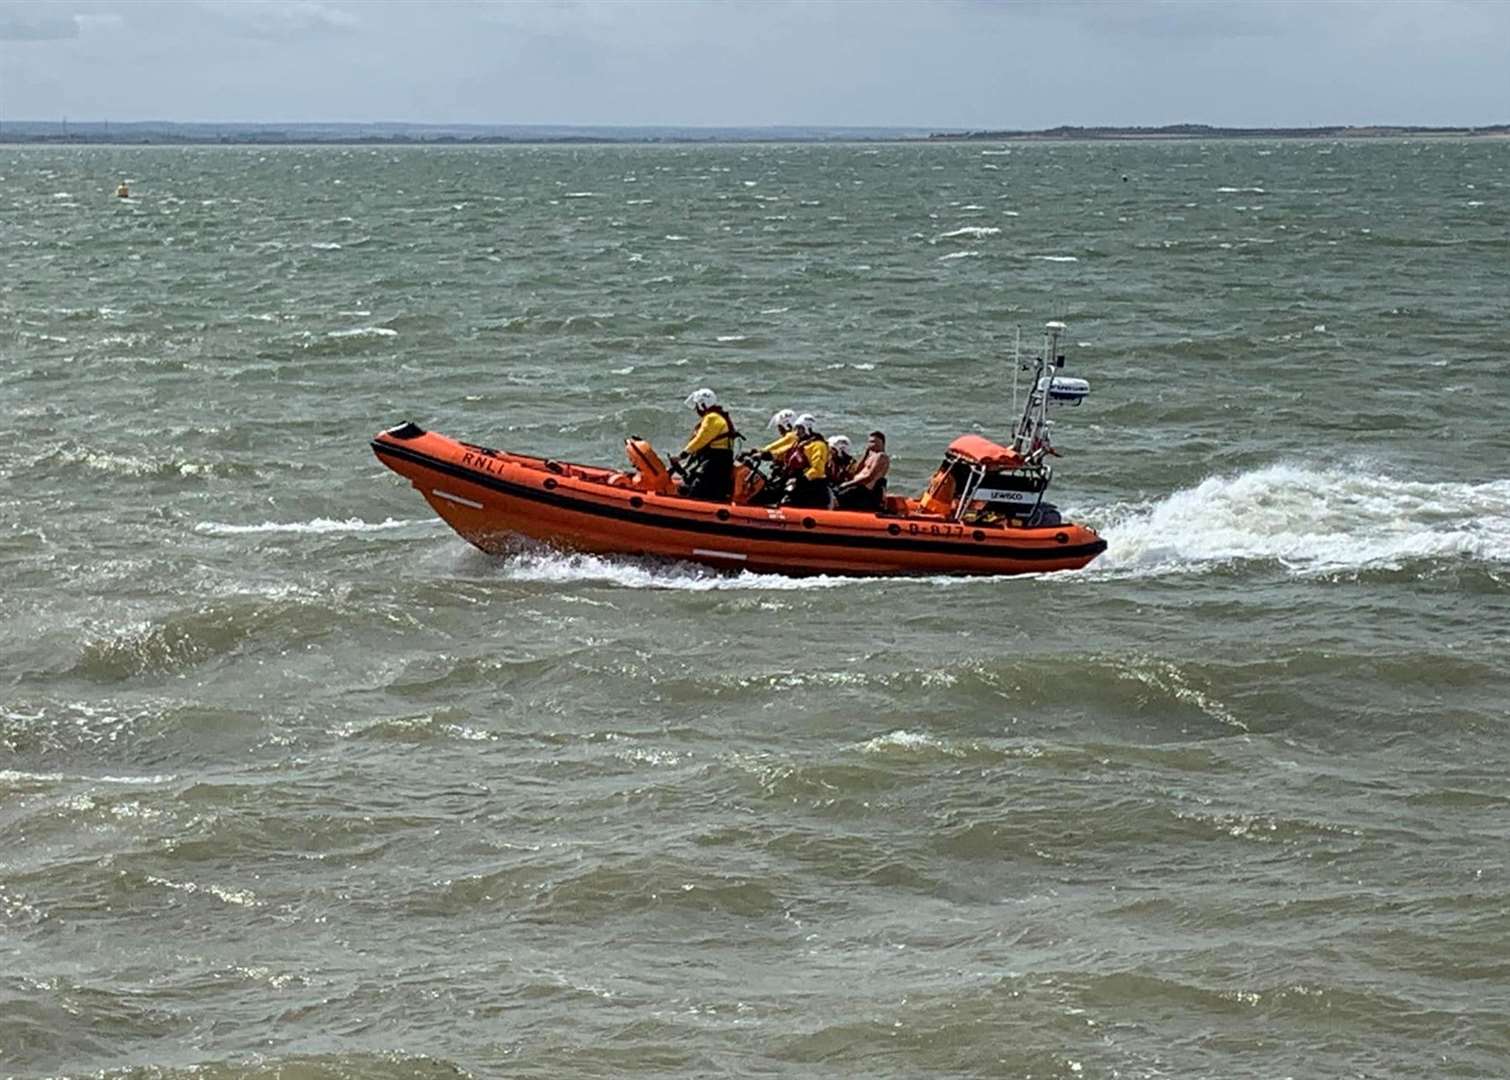 Crews rescued five people, including two children, after a boat's engine failed. Picture: RNLI